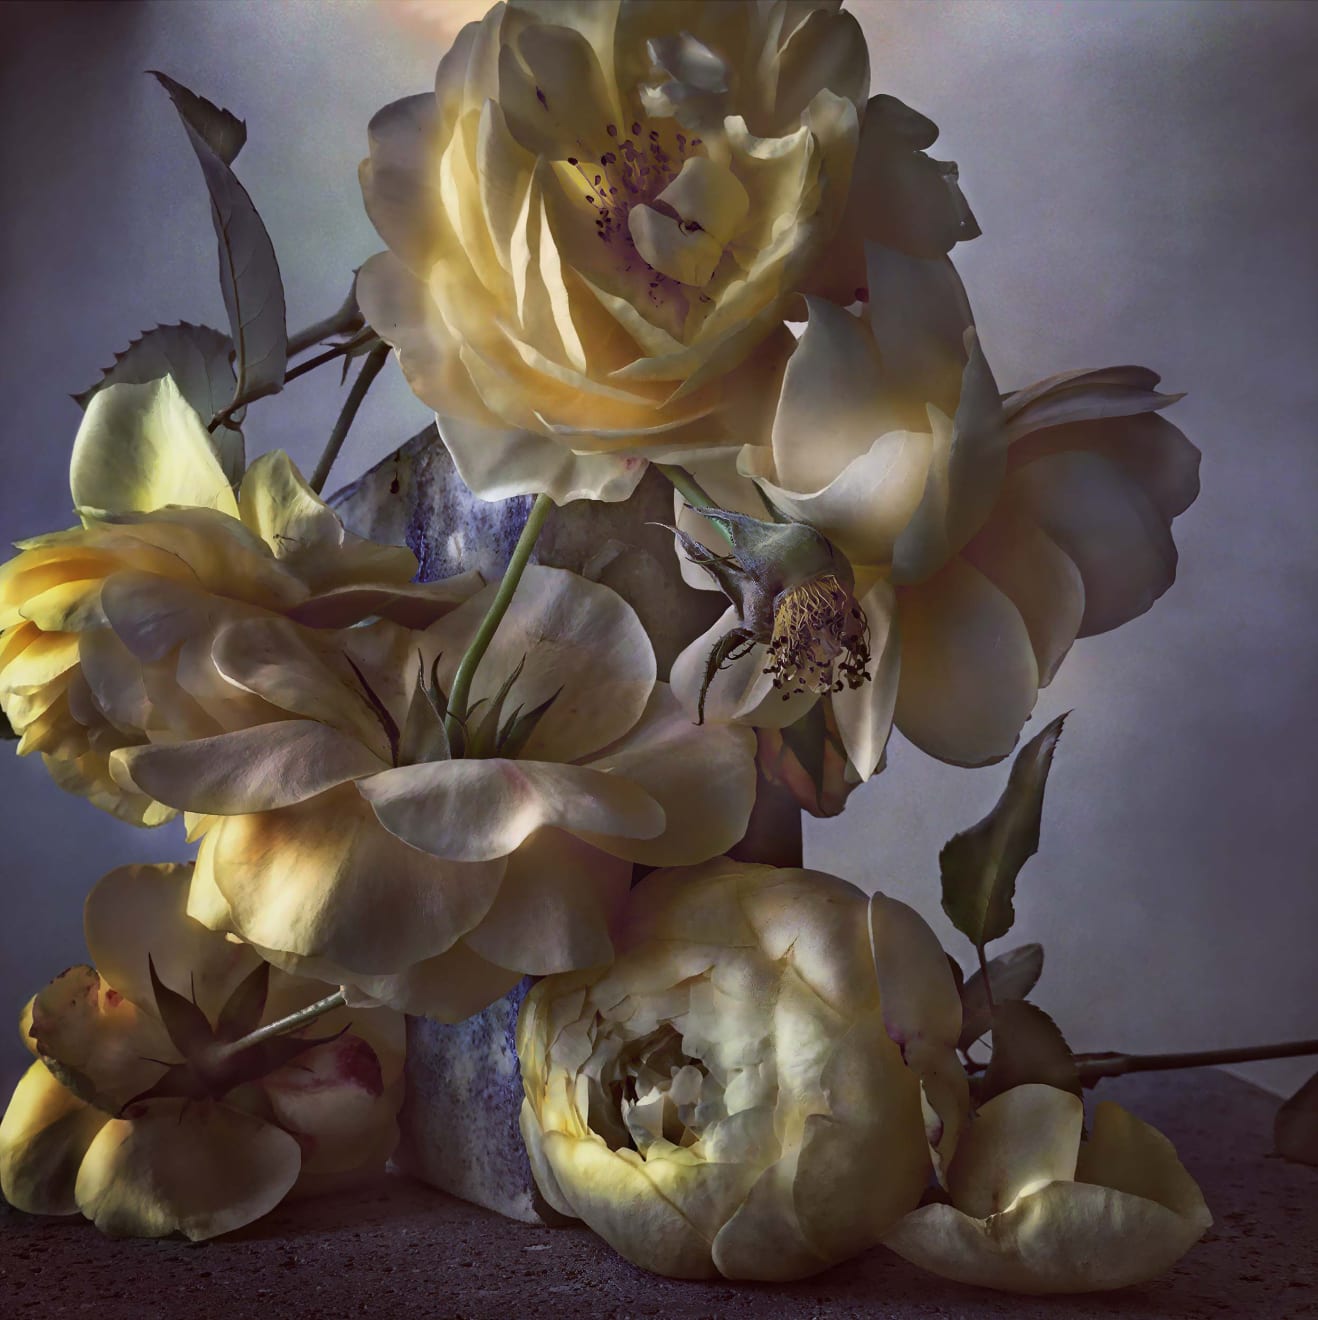 Nick Knight Saturday 24th October, 2015, 2019 Hand-coated pigment print (KNI 009)